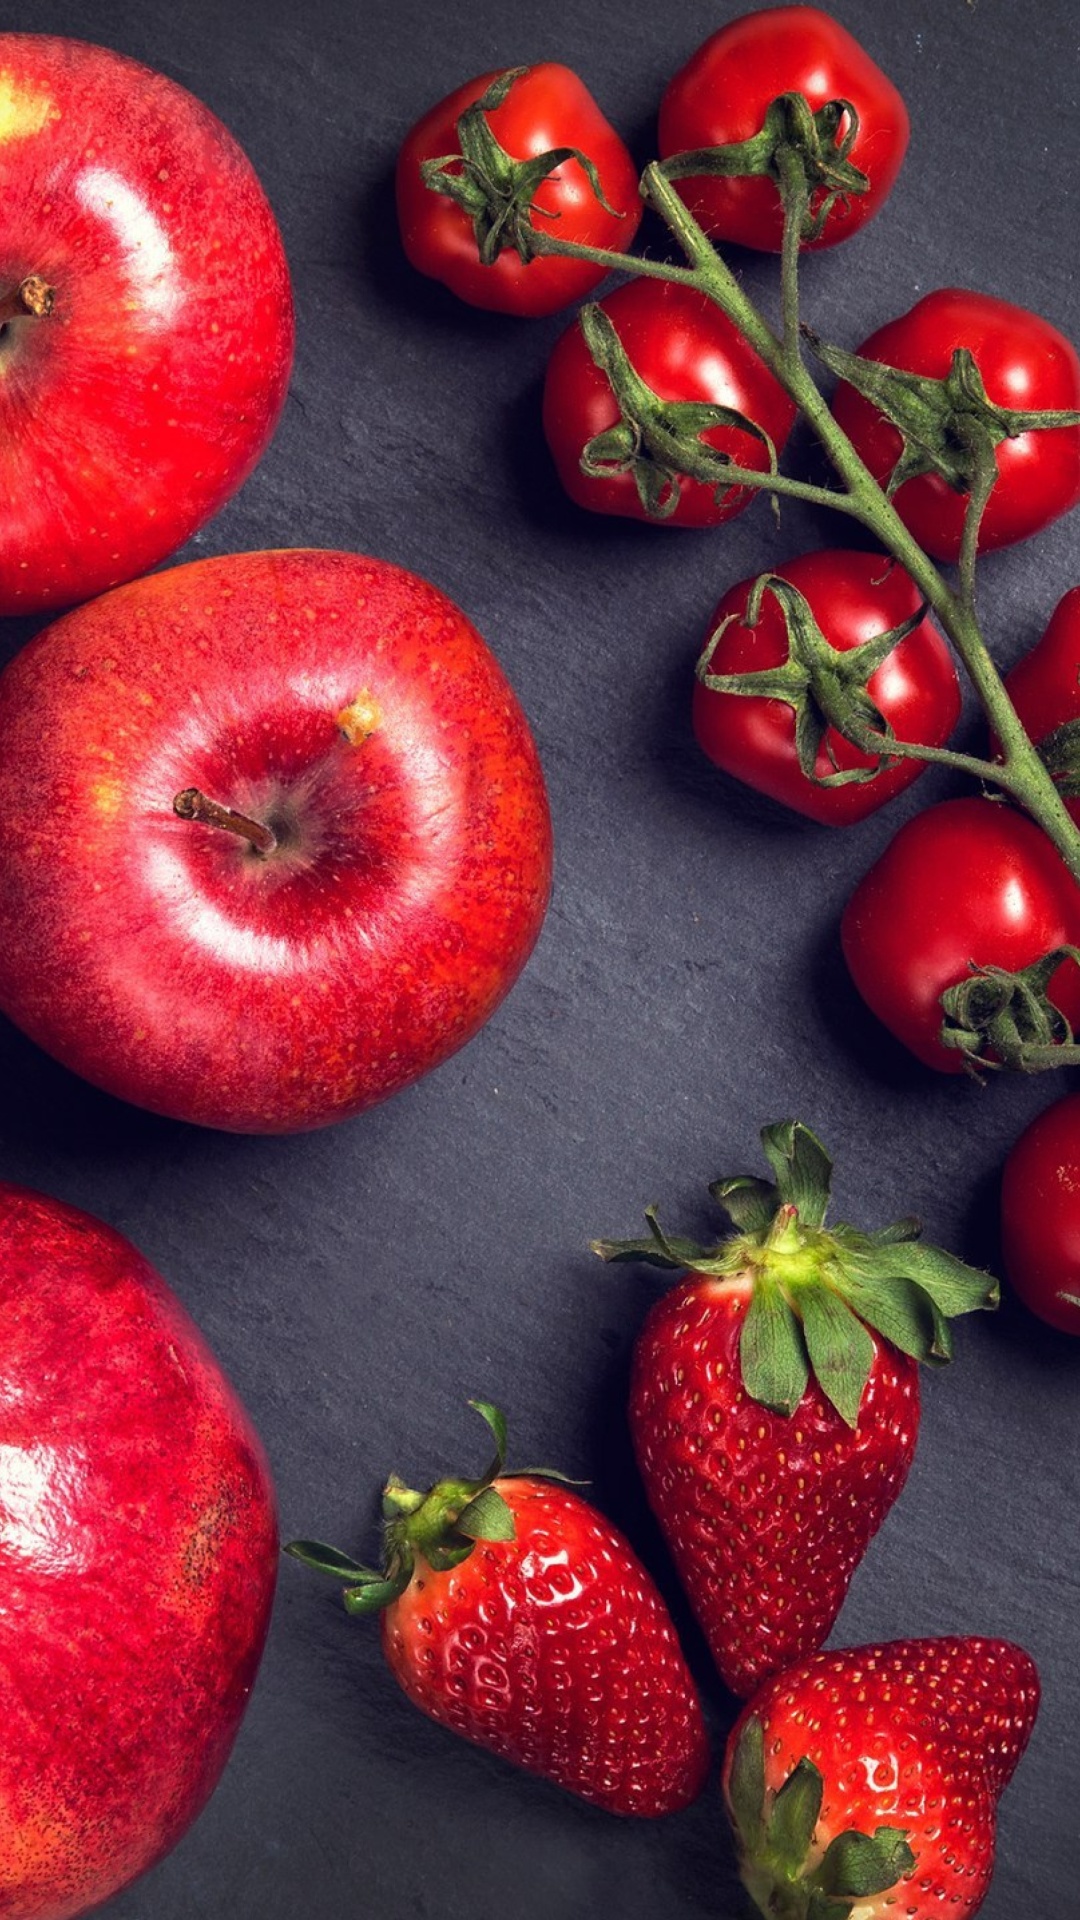 Red fruits and vegetables screenshot #1 1080x1920